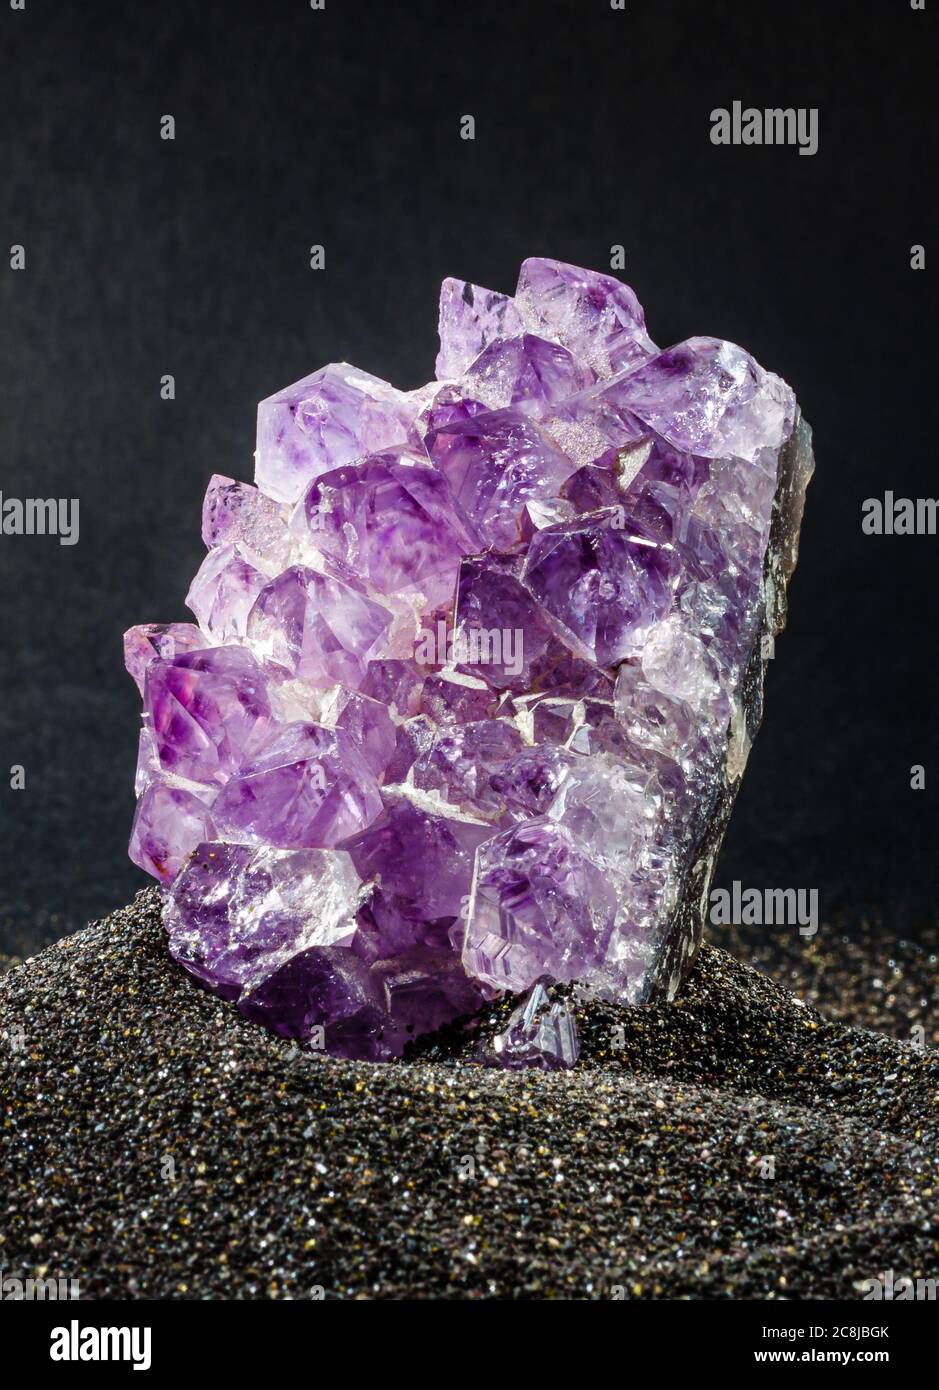 Amethyst gemstone closeup placed on black sand. Mineral is showcased in a volcanic natural feeling like environment Stock Photo